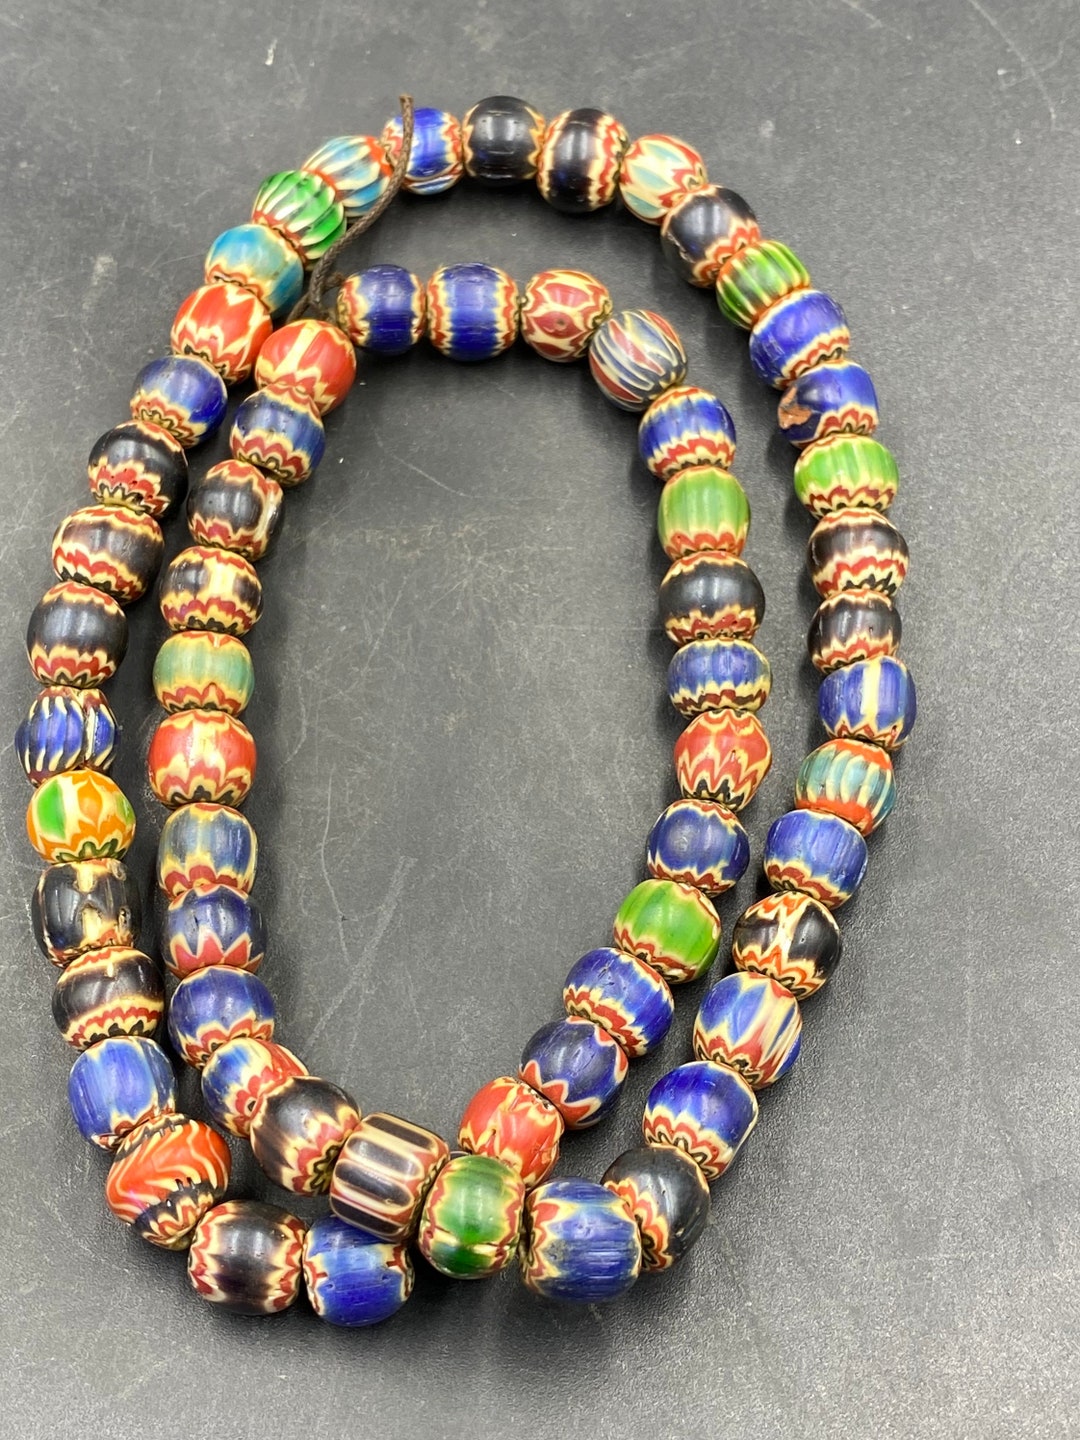 Very Old Unique Ancient Chevron African Trade Beads Necklace - Etsy